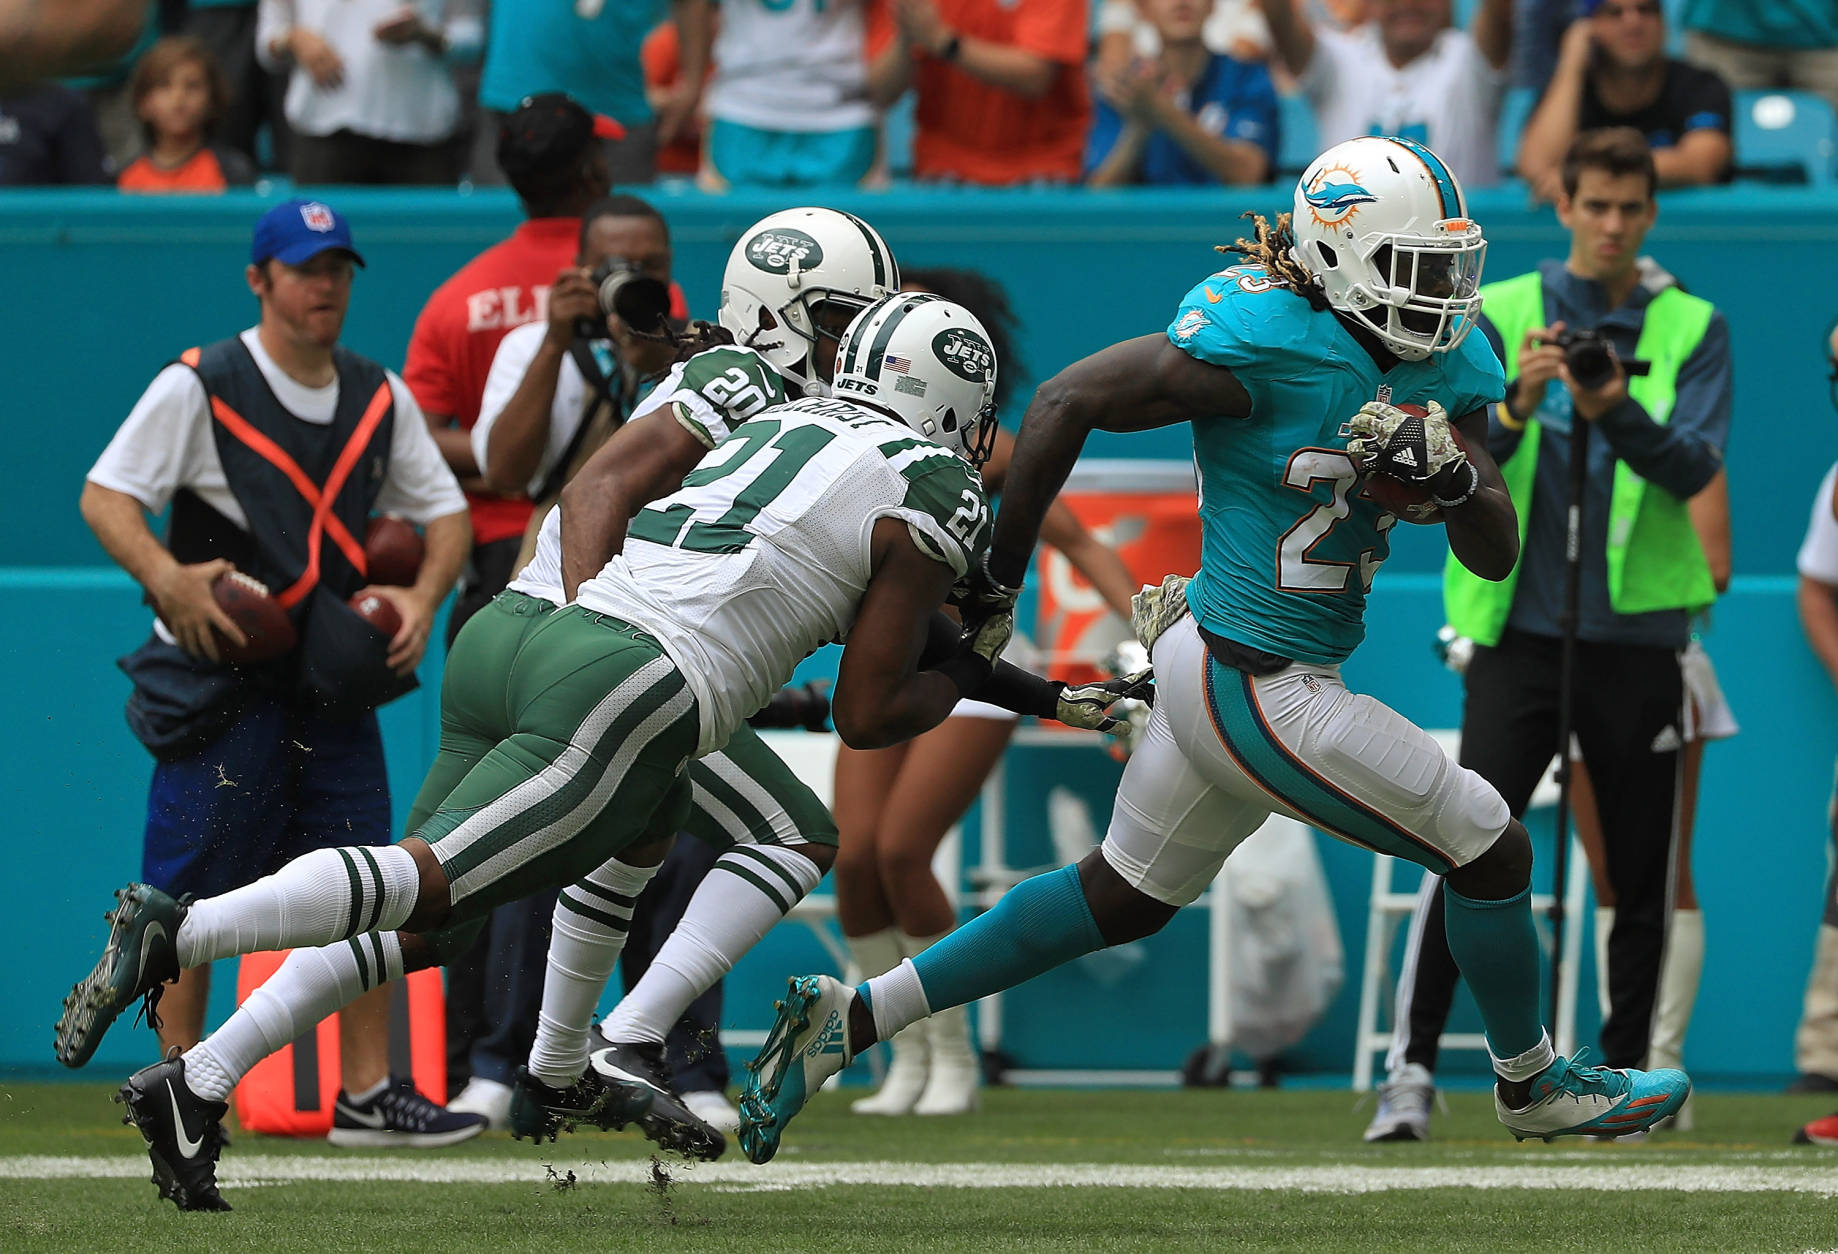 MIAMI GARDENS, FL - NOVEMBER 06: Jay Ajayi #23 of the Miami Dolphins rushes for a touchdown during a game against the New York Jets at Hard Rock Stadium on November 6, 2016 in Miami Gardens, Florida.  (Photo by Mike Ehrmann/Getty Images)